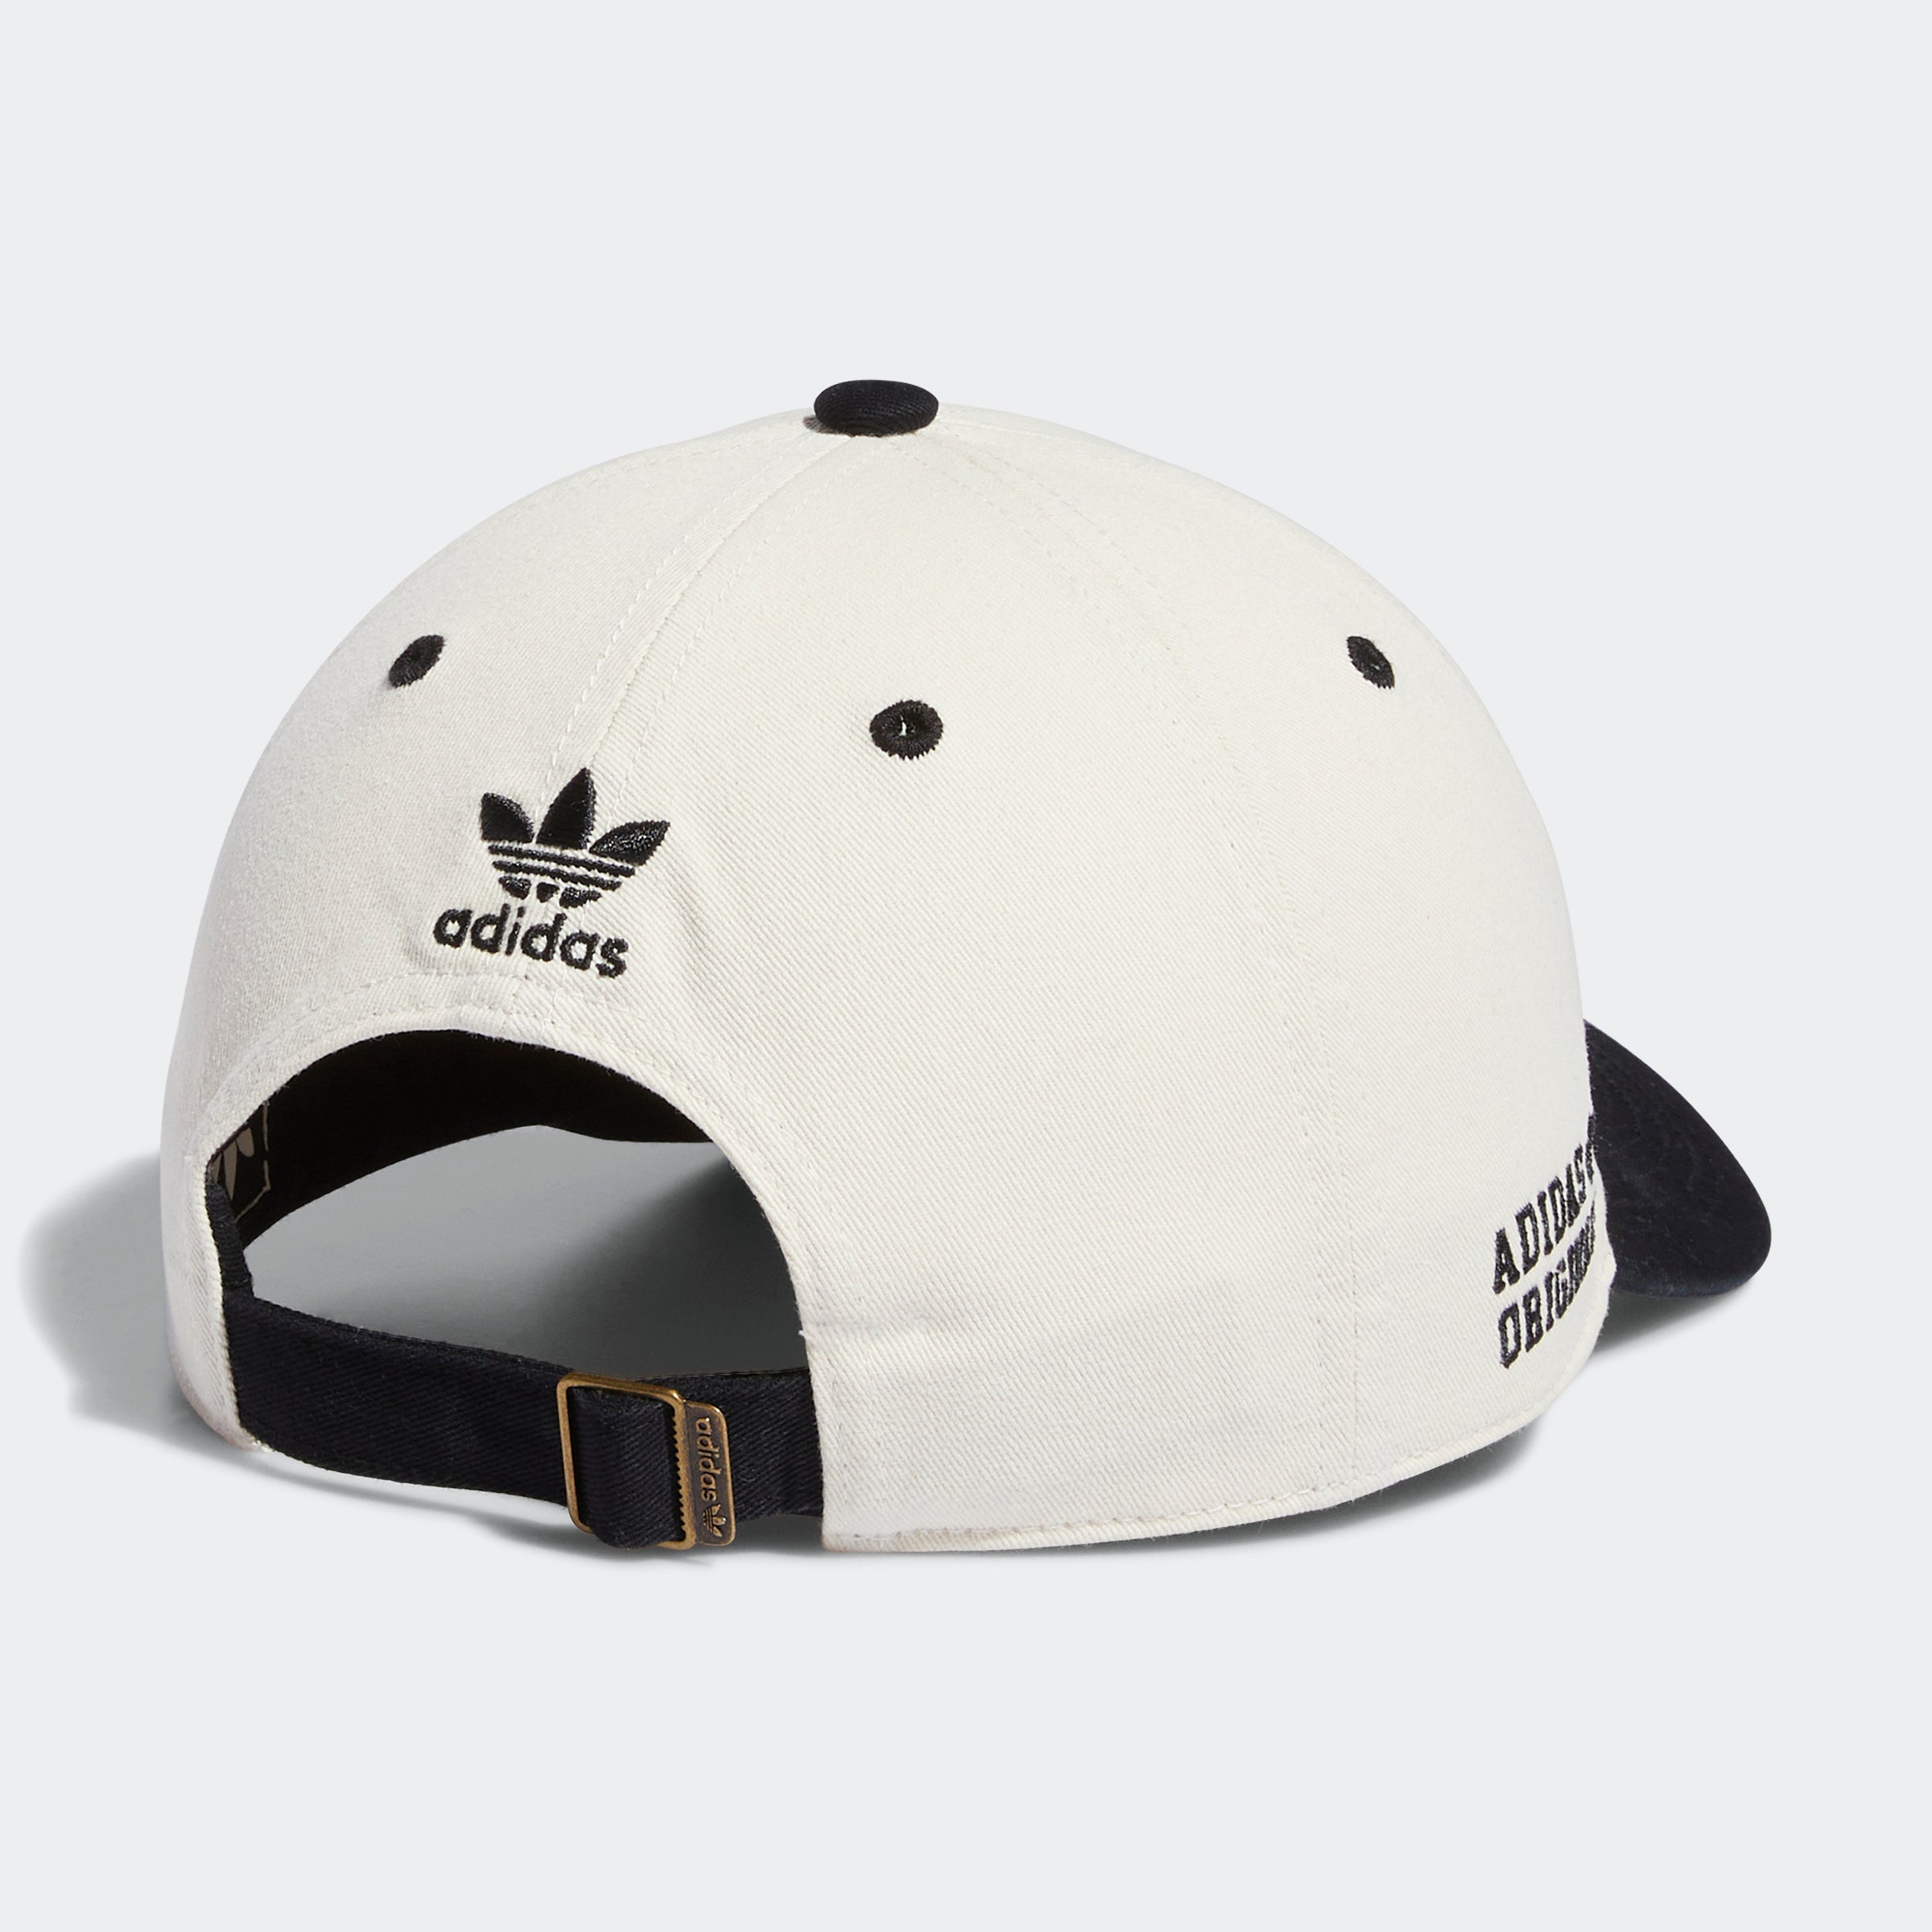 City Hat New White Wonder GB4284 Chicago Prep Relaxed adidas Sports |